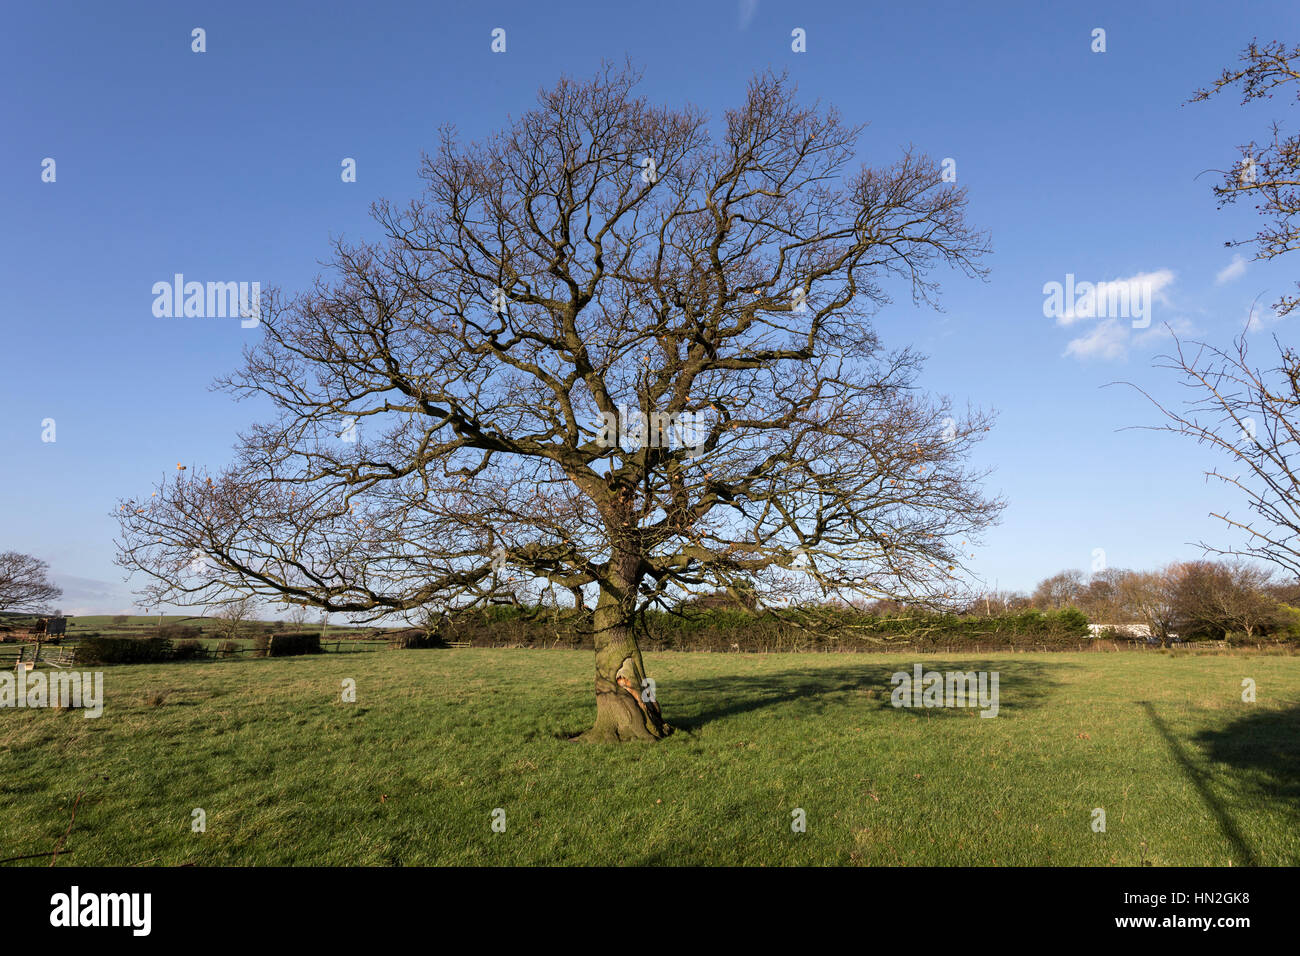 Oak tree without leaves in Autumn and Winter, a series shot from the same camera position. Stock Photo